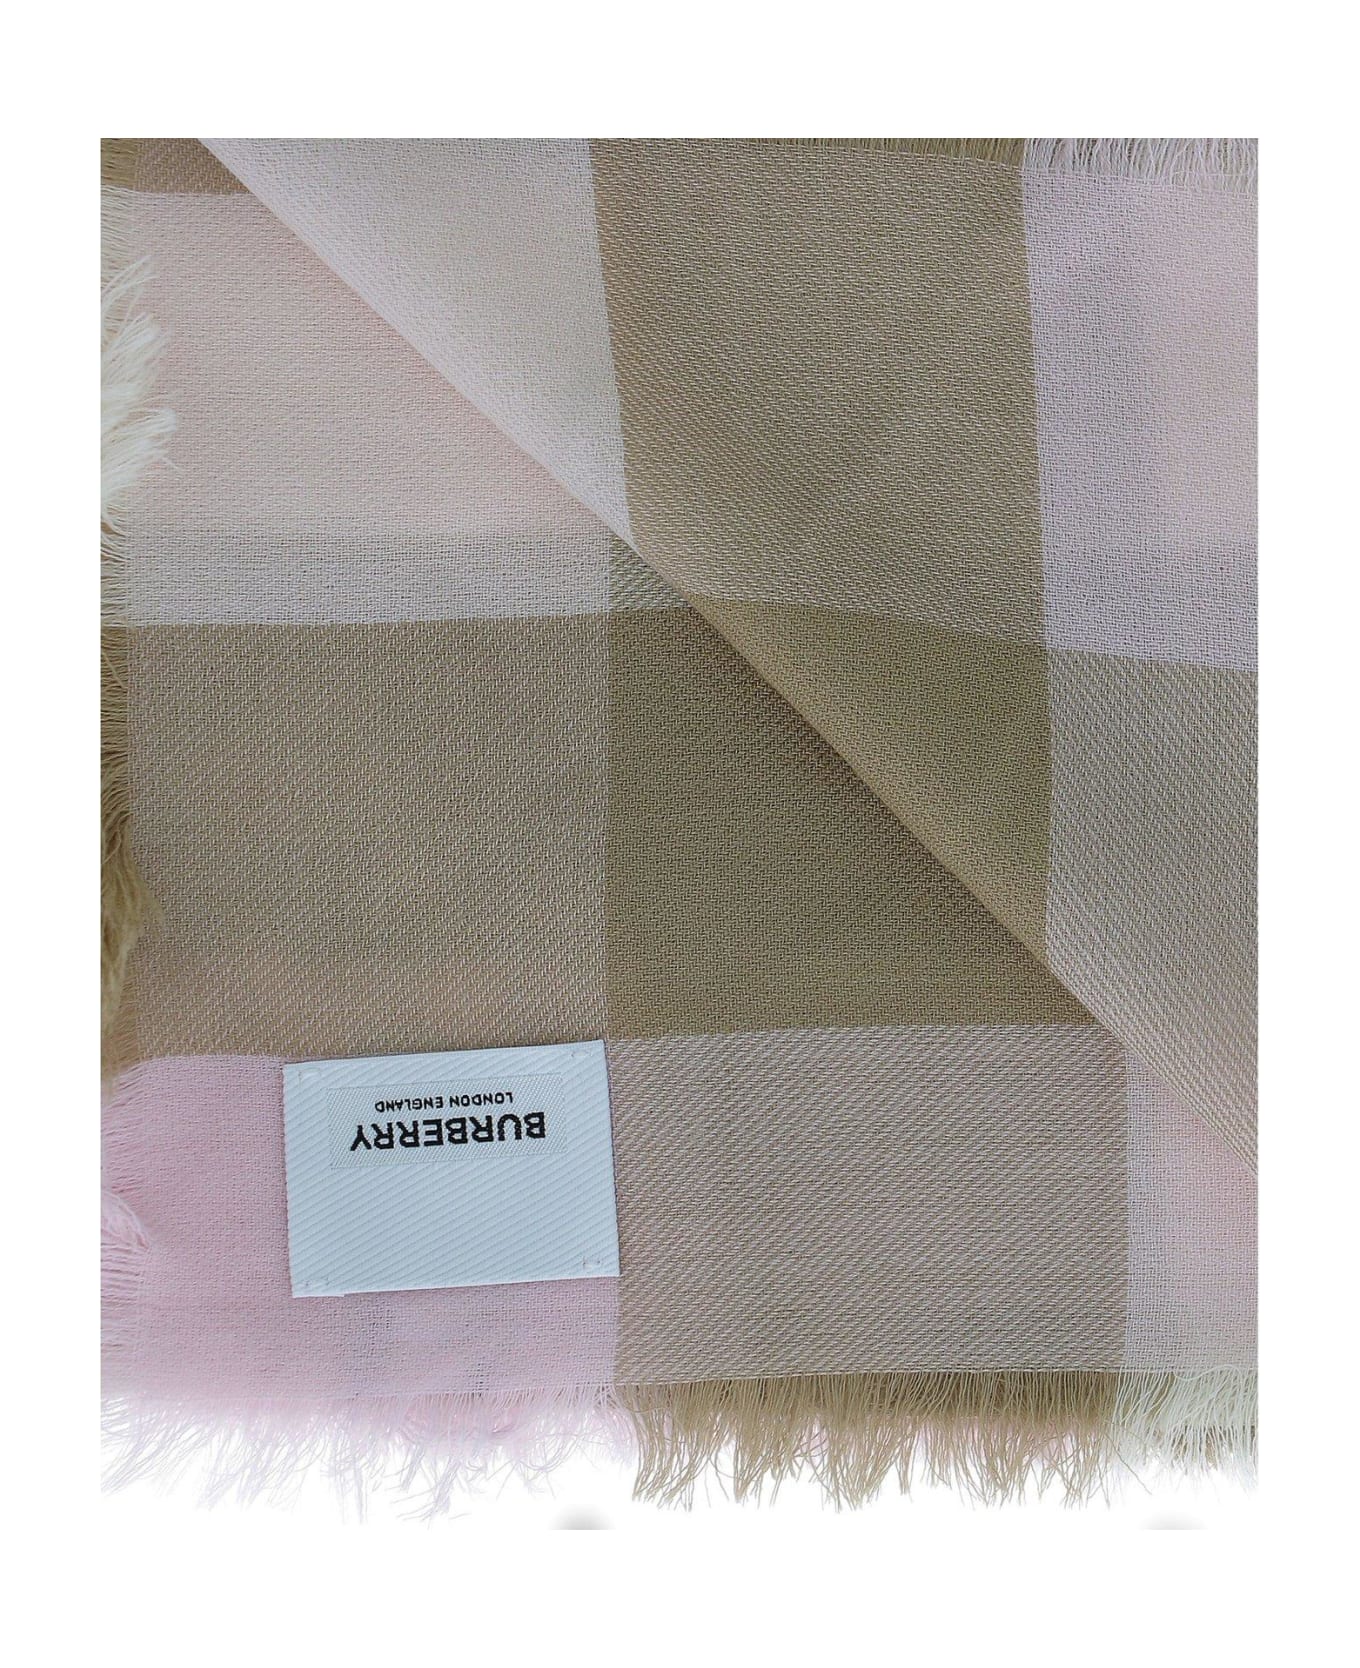 Burberry Lightweight Checked Scarf - ALABASTER